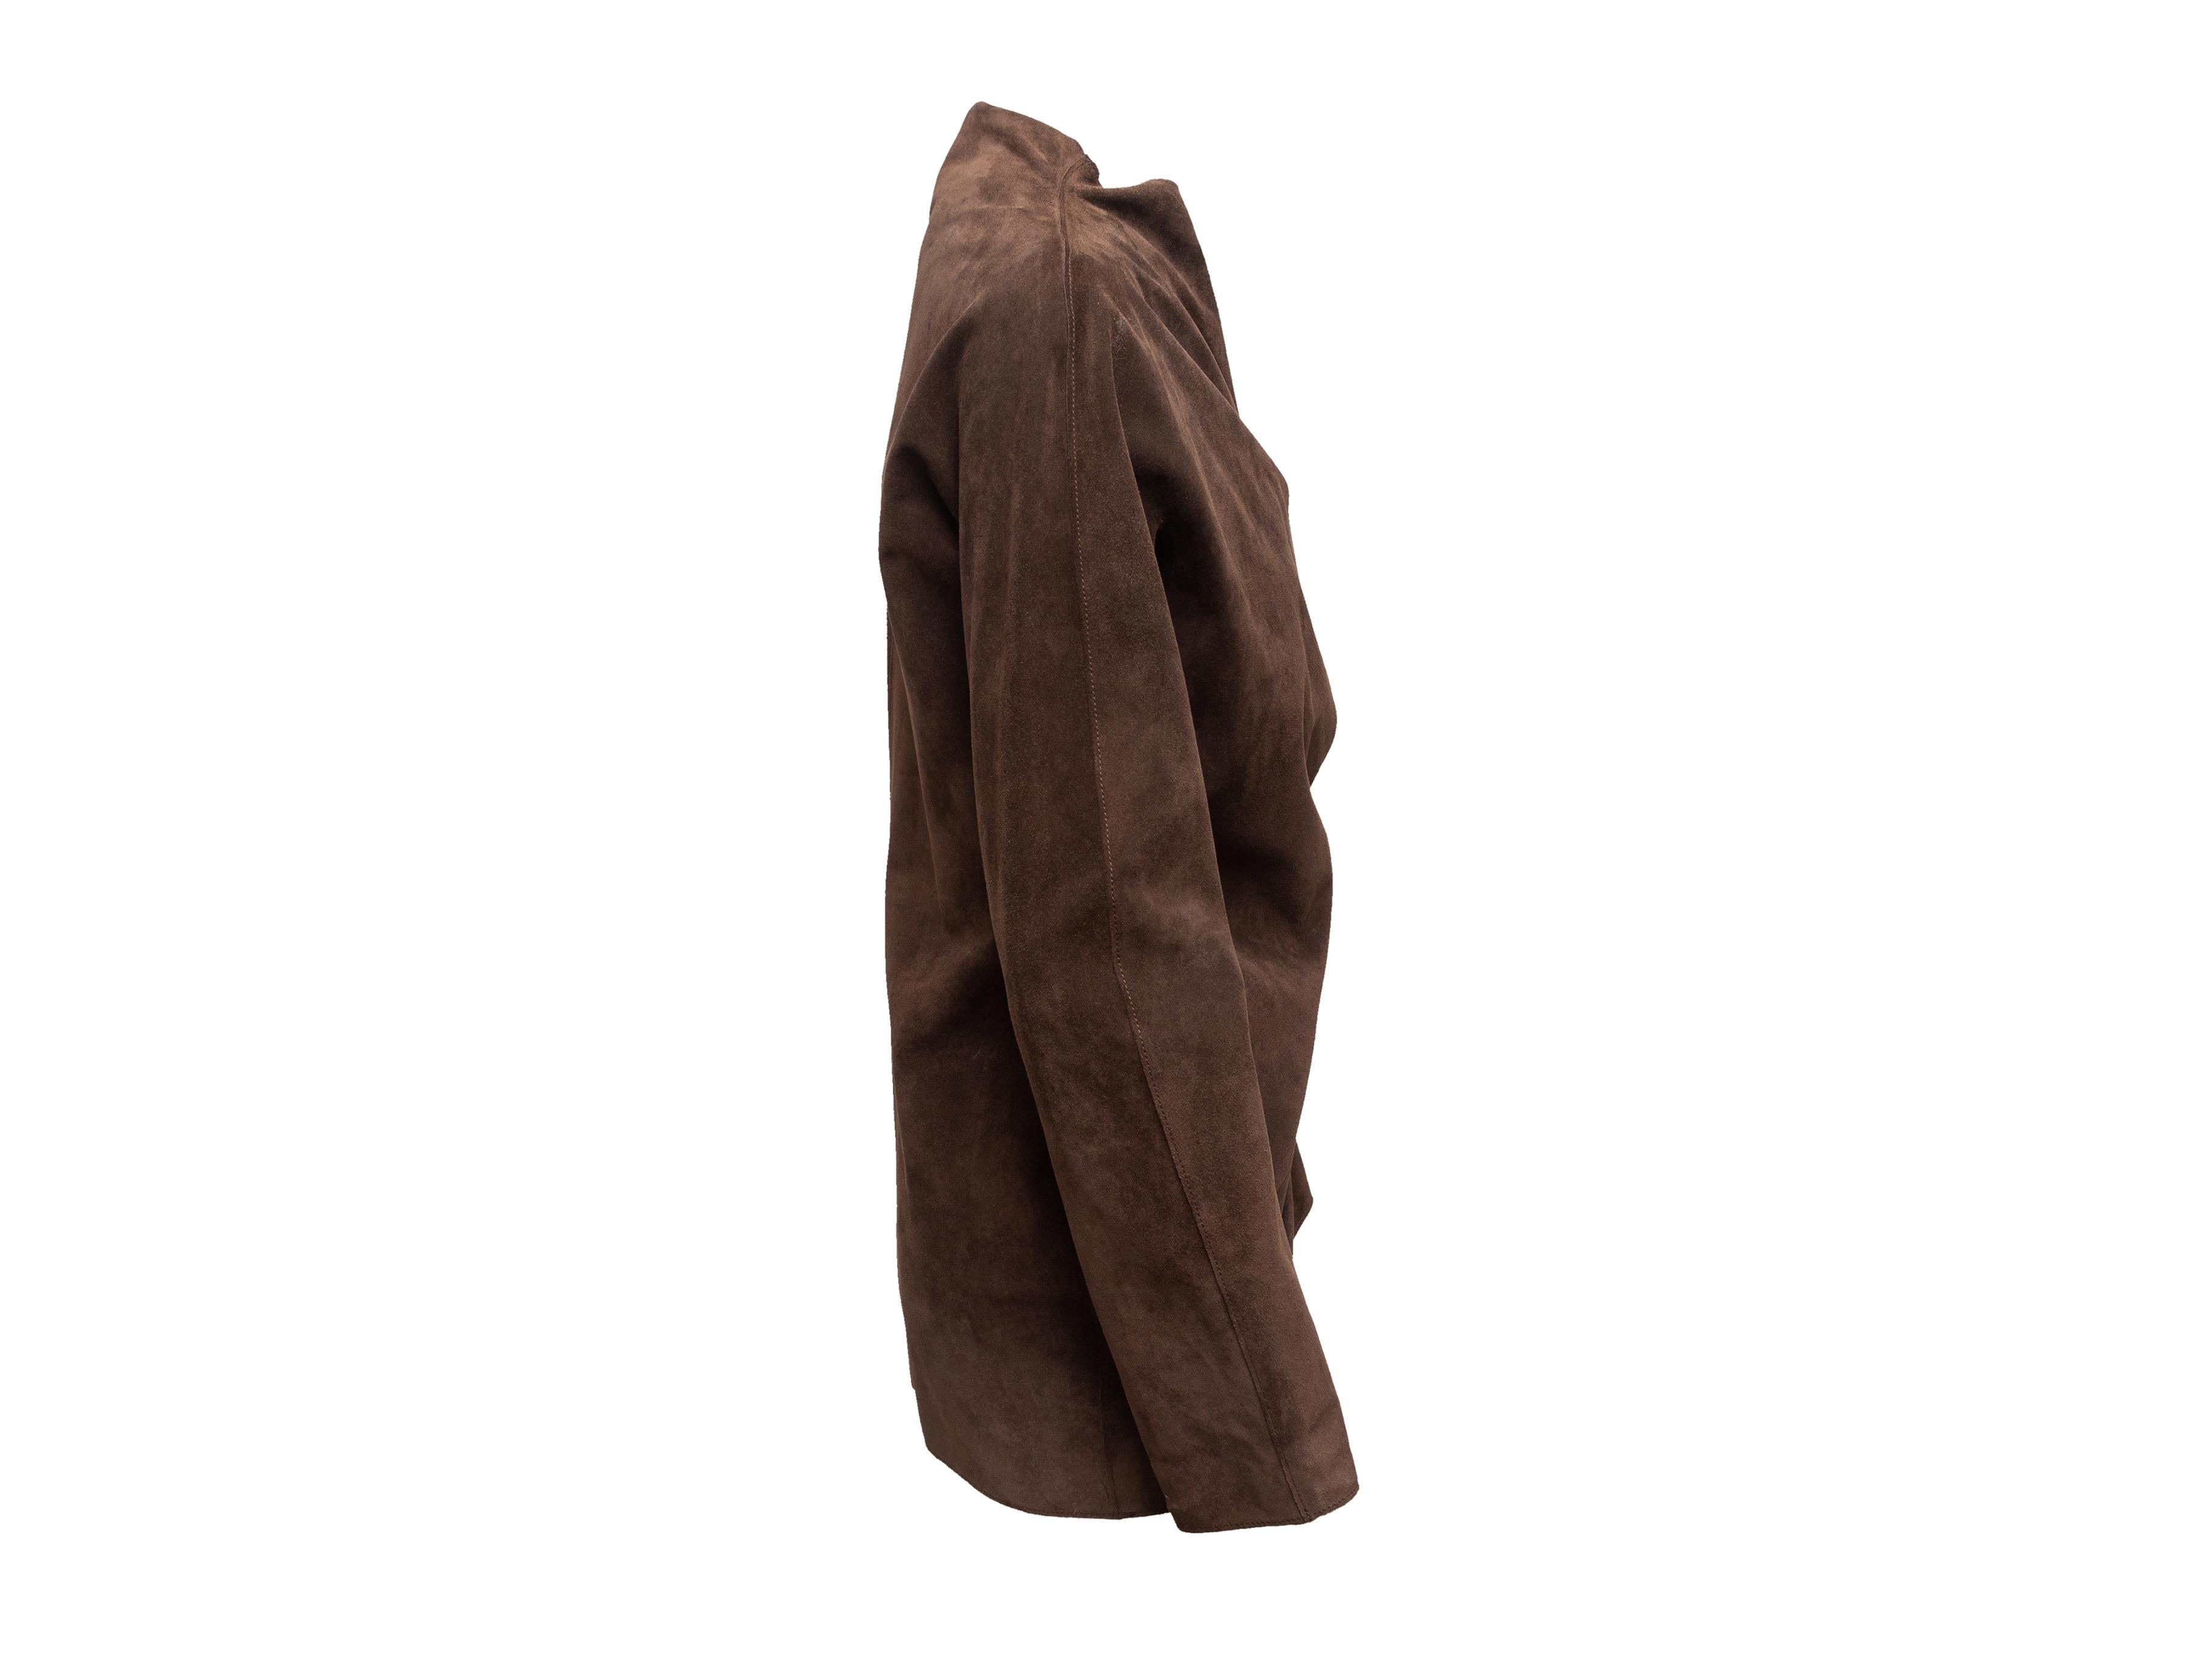 Product details: Brown asymmetrical suede jacket by Lanvin. From the Winter 2009 Collection. High neck. Ruching at front. Zip closure at front. Designer size 42. 40